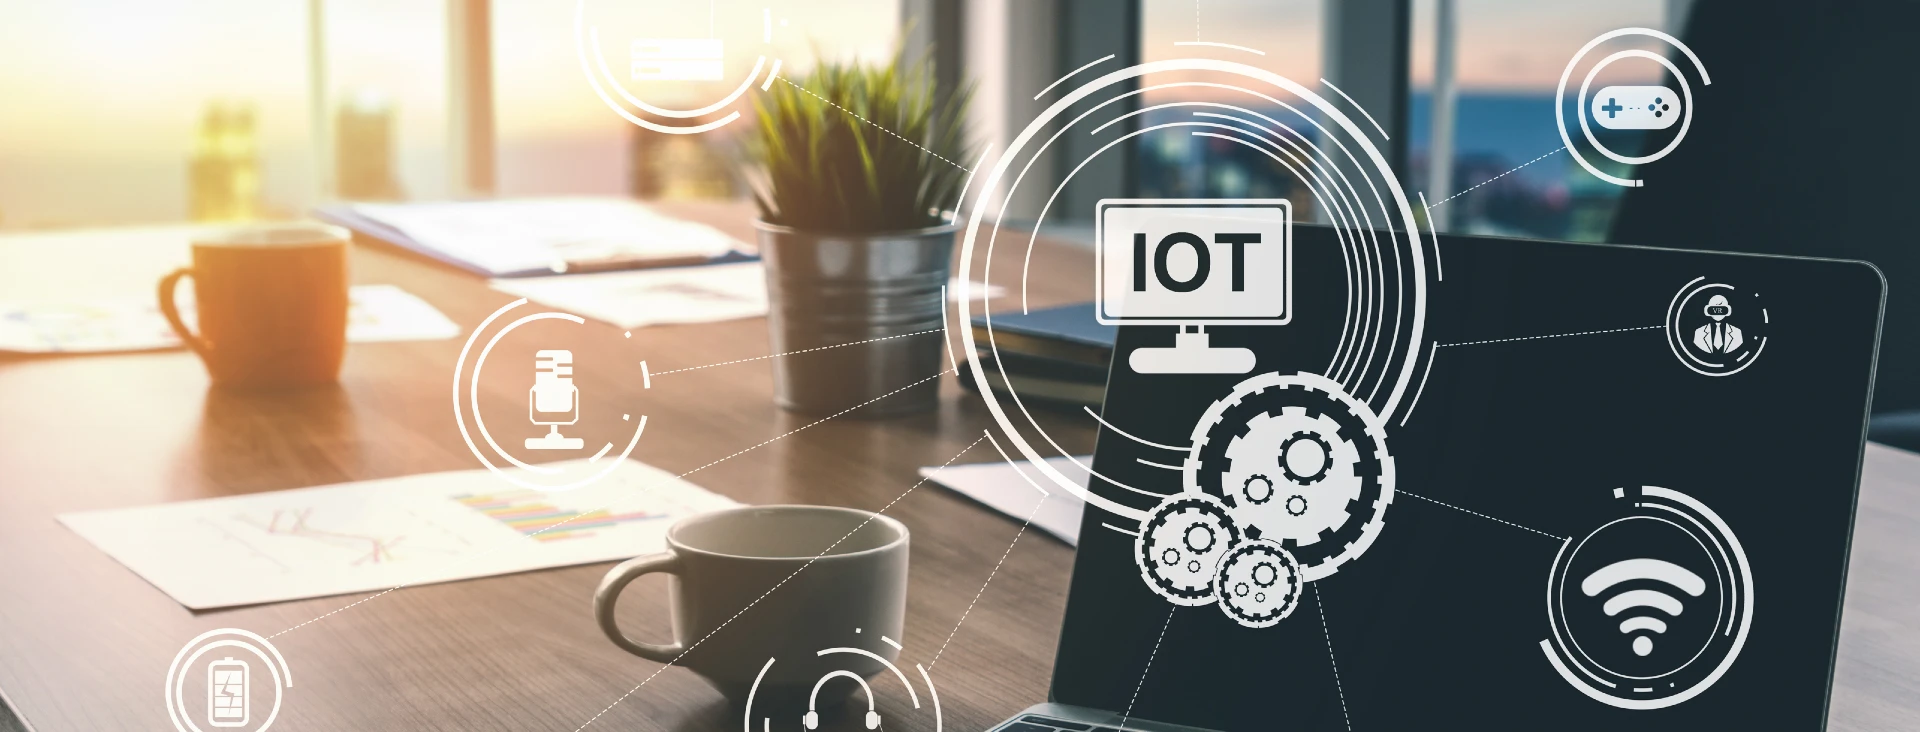 Why IoT and cloud computing is the best strategy for your business?